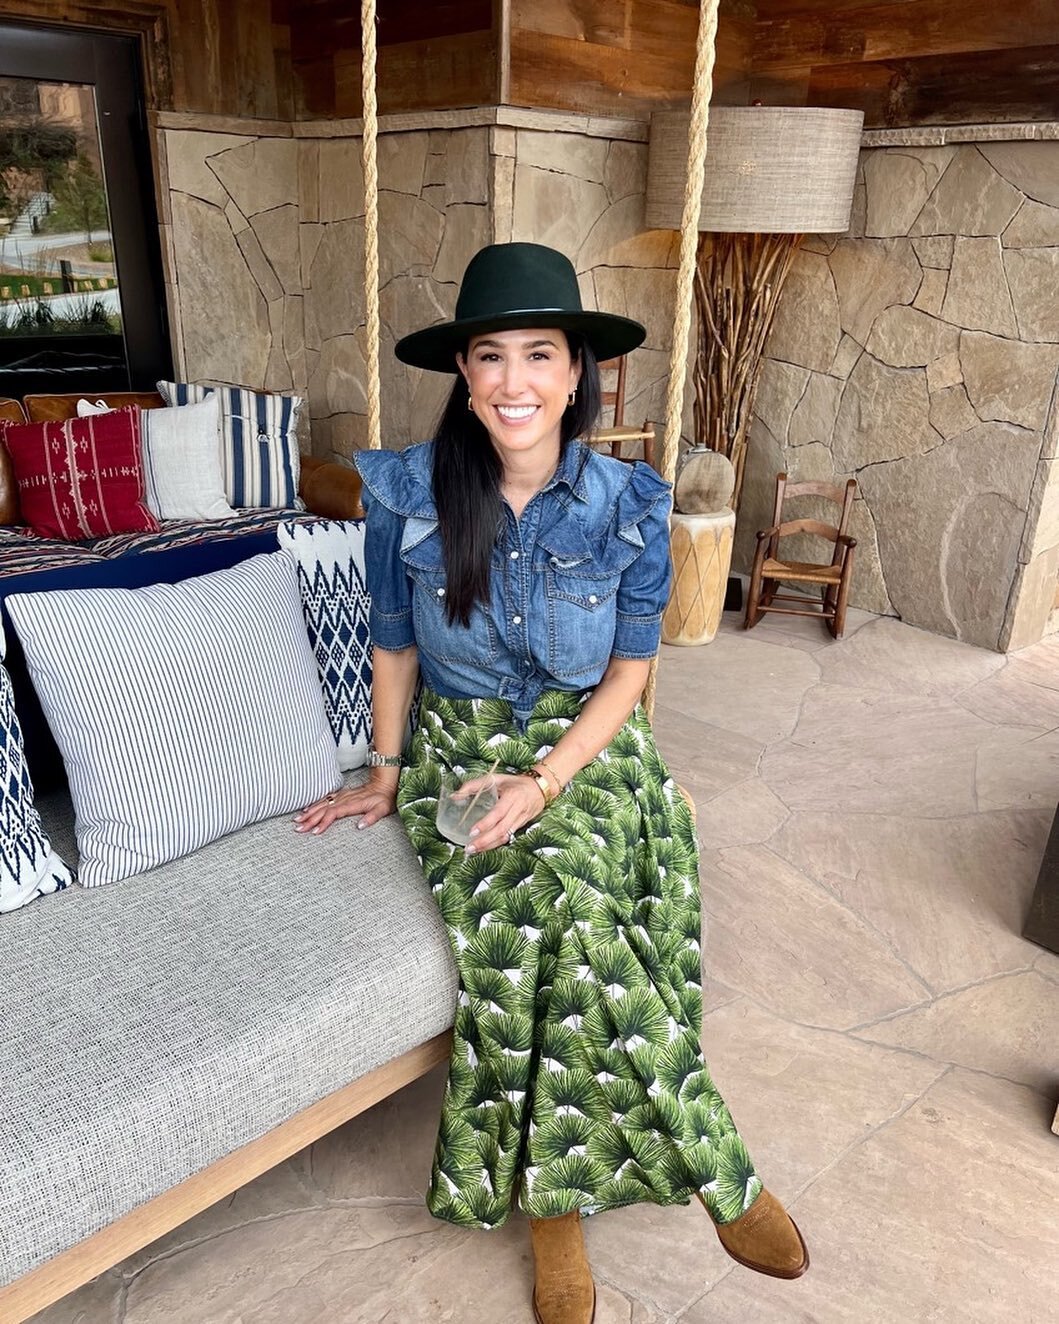 This years #smartflyerONE celebration took place in Santa Fe, a destination filled with spirituality and soul. Follow along in stories where I share my experiences along side our special partners Auberge Resorts Collection and Four Seasons Resorts an